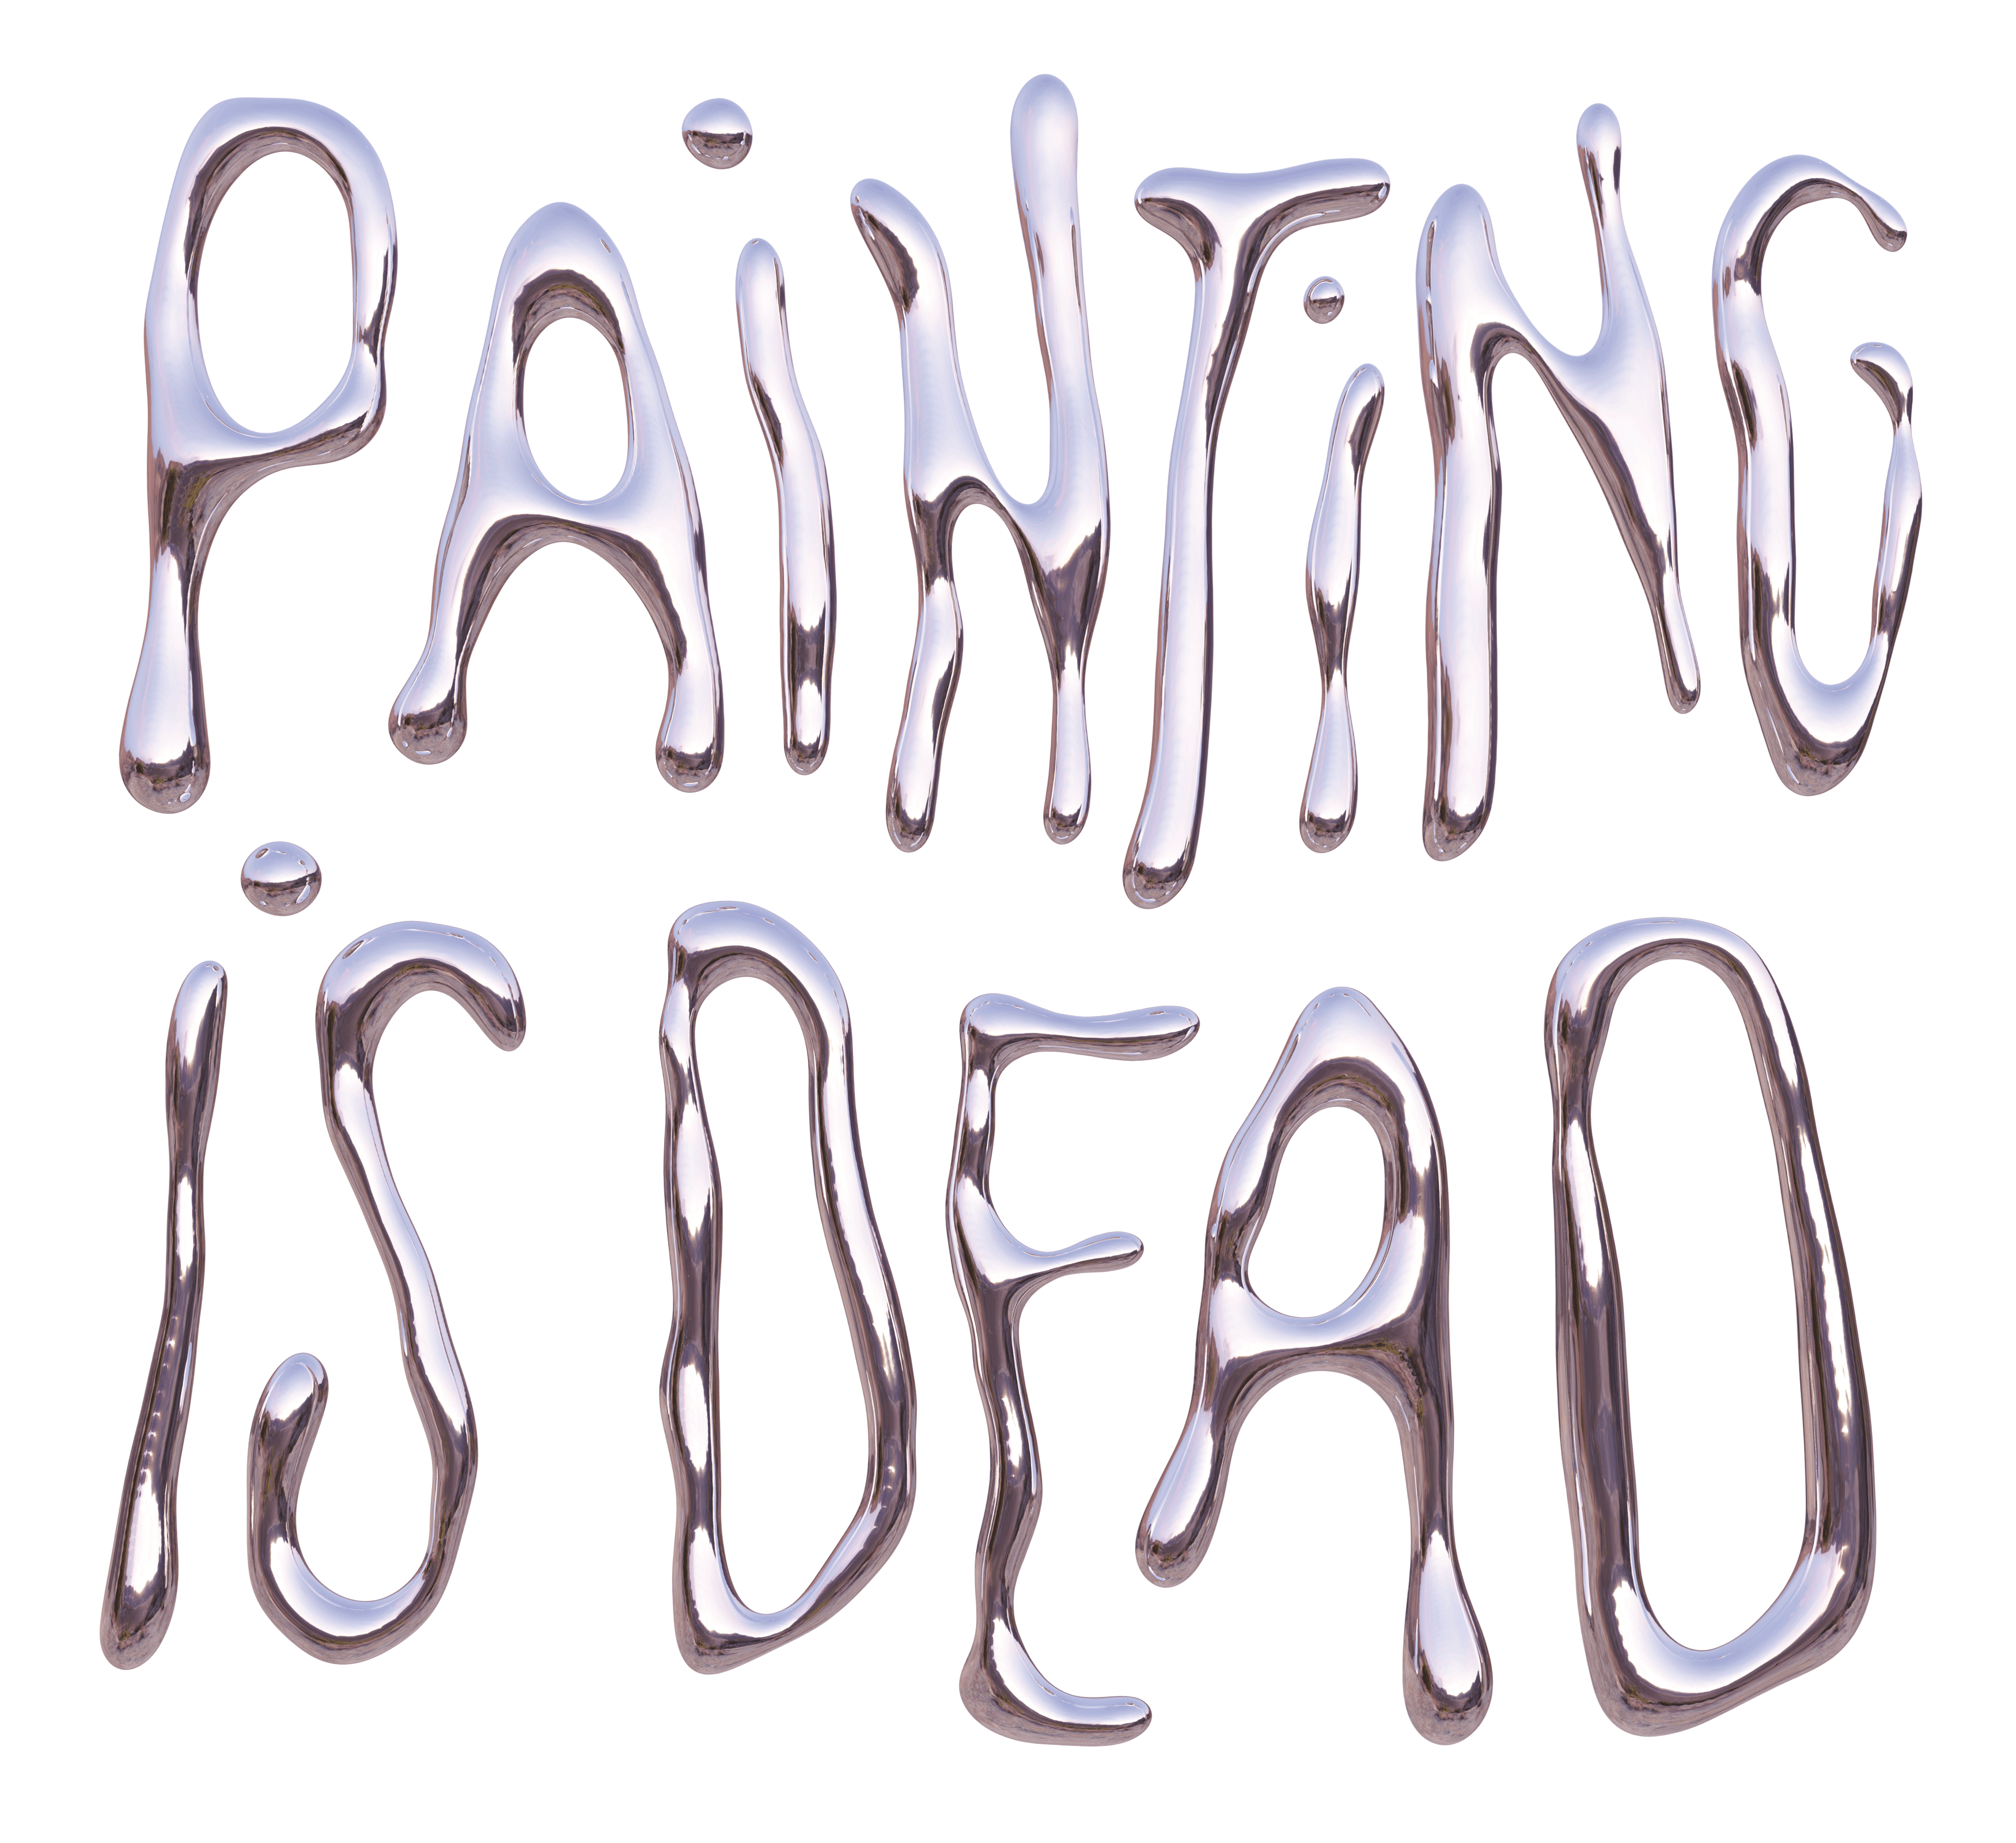 PAINTING IS DEAD